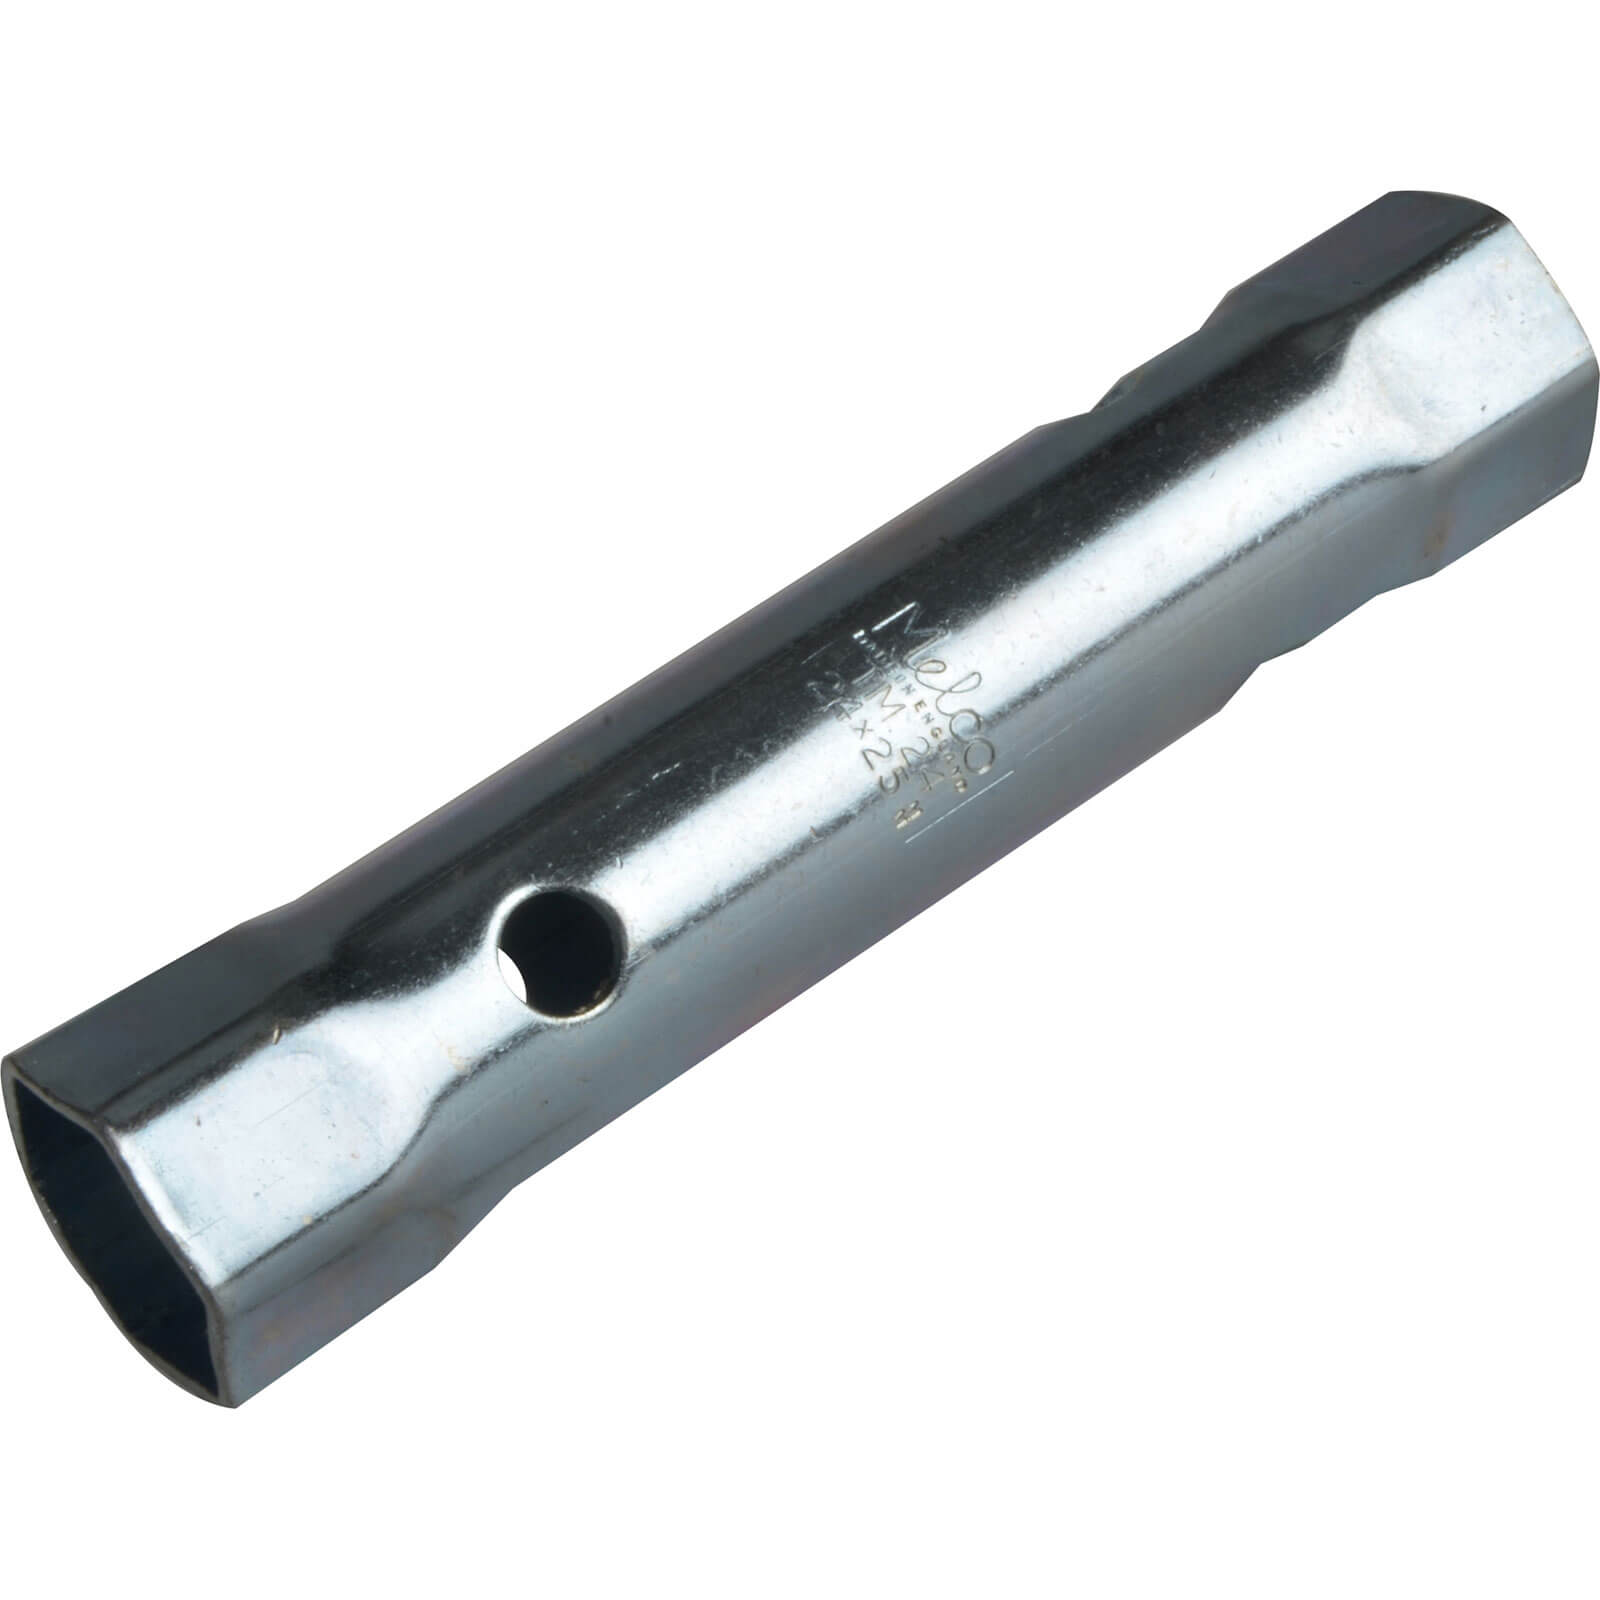 Image of Melco Box Spanner Metric 24mm x 25mm